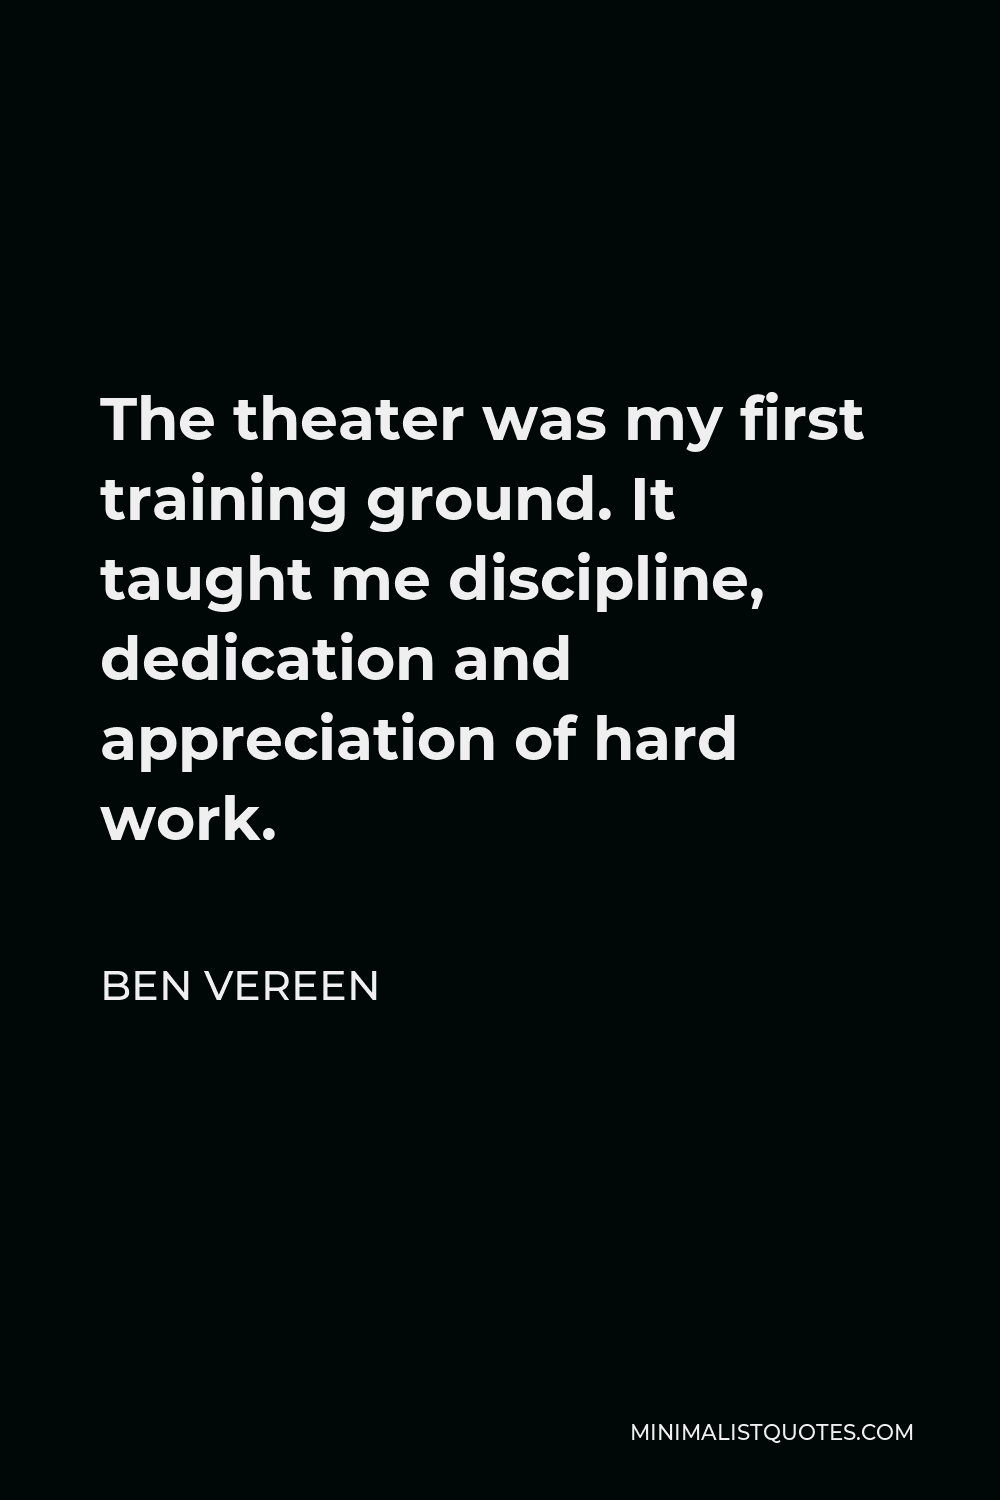 Ben Vereen Quote - The theater was my first training ground. It taught me discipline, dedication and appreciation of hard work.